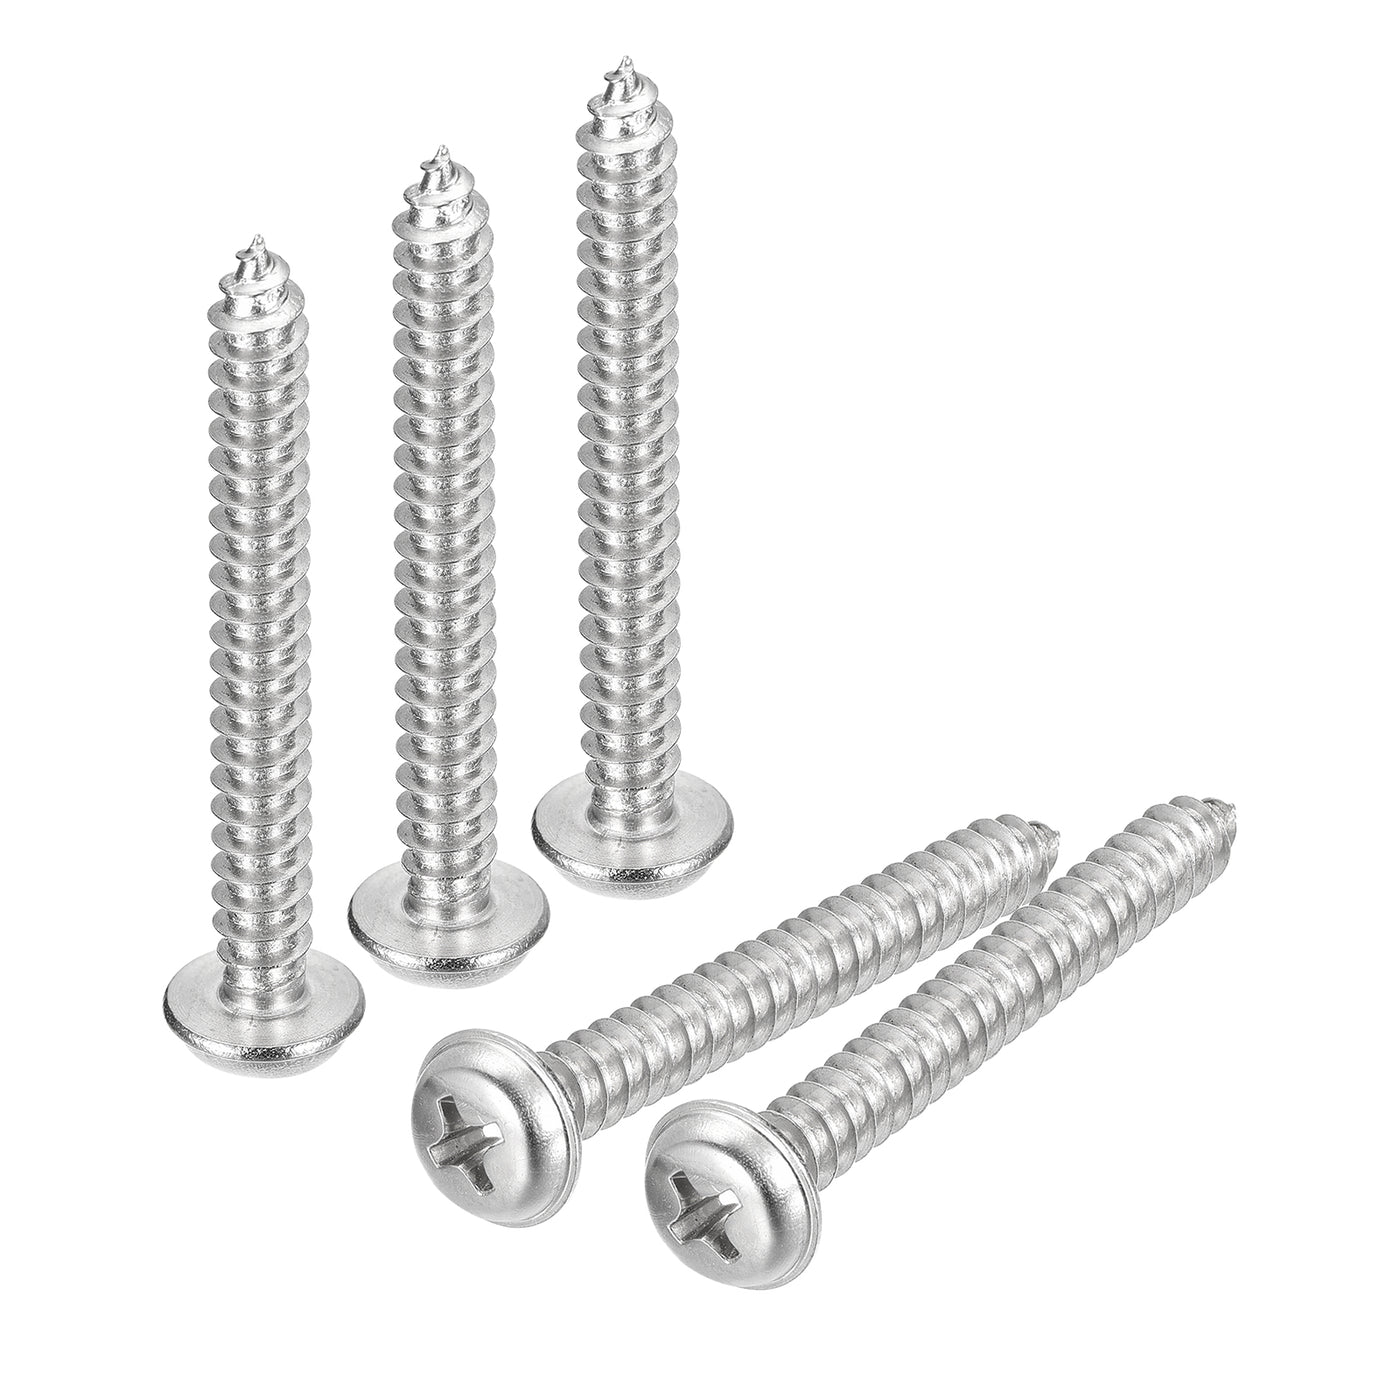 uxcell Uxcell ST5x40mm Phillips Pan Head Self-tapping Screw with Washer, 50pcs - 304 Stainless Steel Wood Screw Full Thread (Silver)